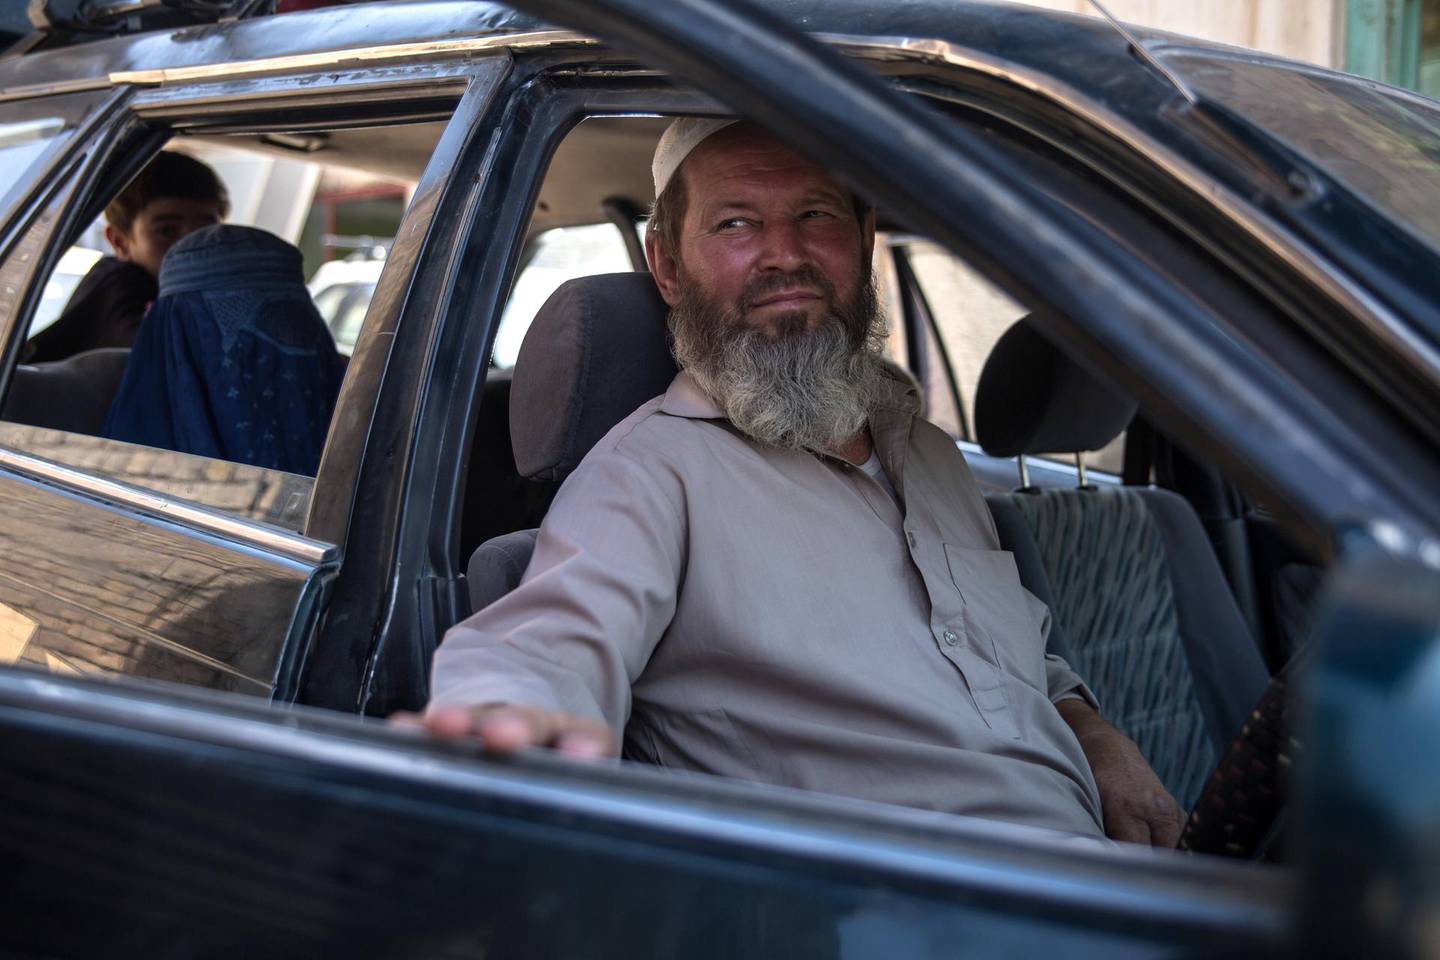 Haji Ahmad, 54, a former Soviet soldier, now works as a taxt driver in Kunduz city. He arrived in Afghanistan in 1984 and hasn't left since. 